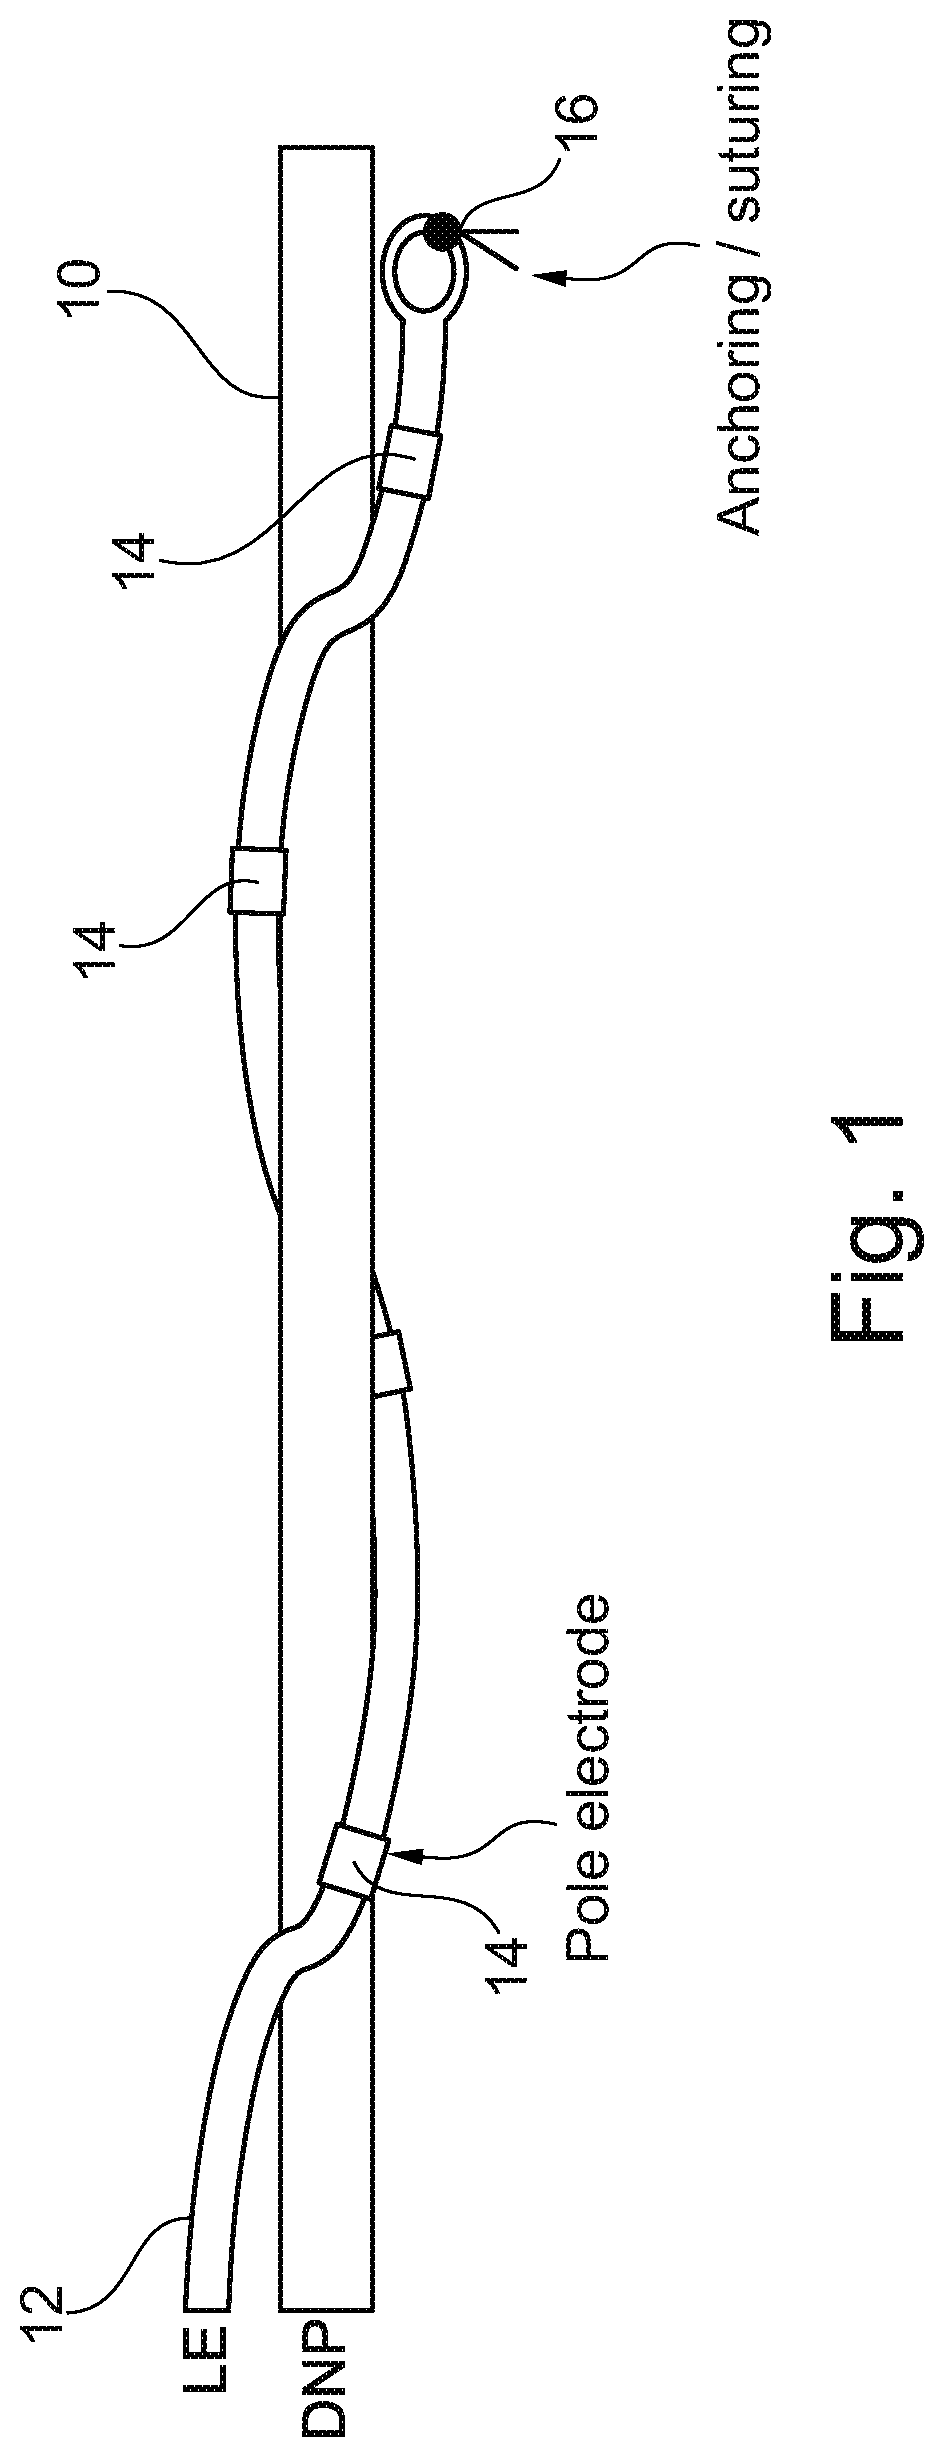 Implantable neurostimulator and methods for implanting and using same